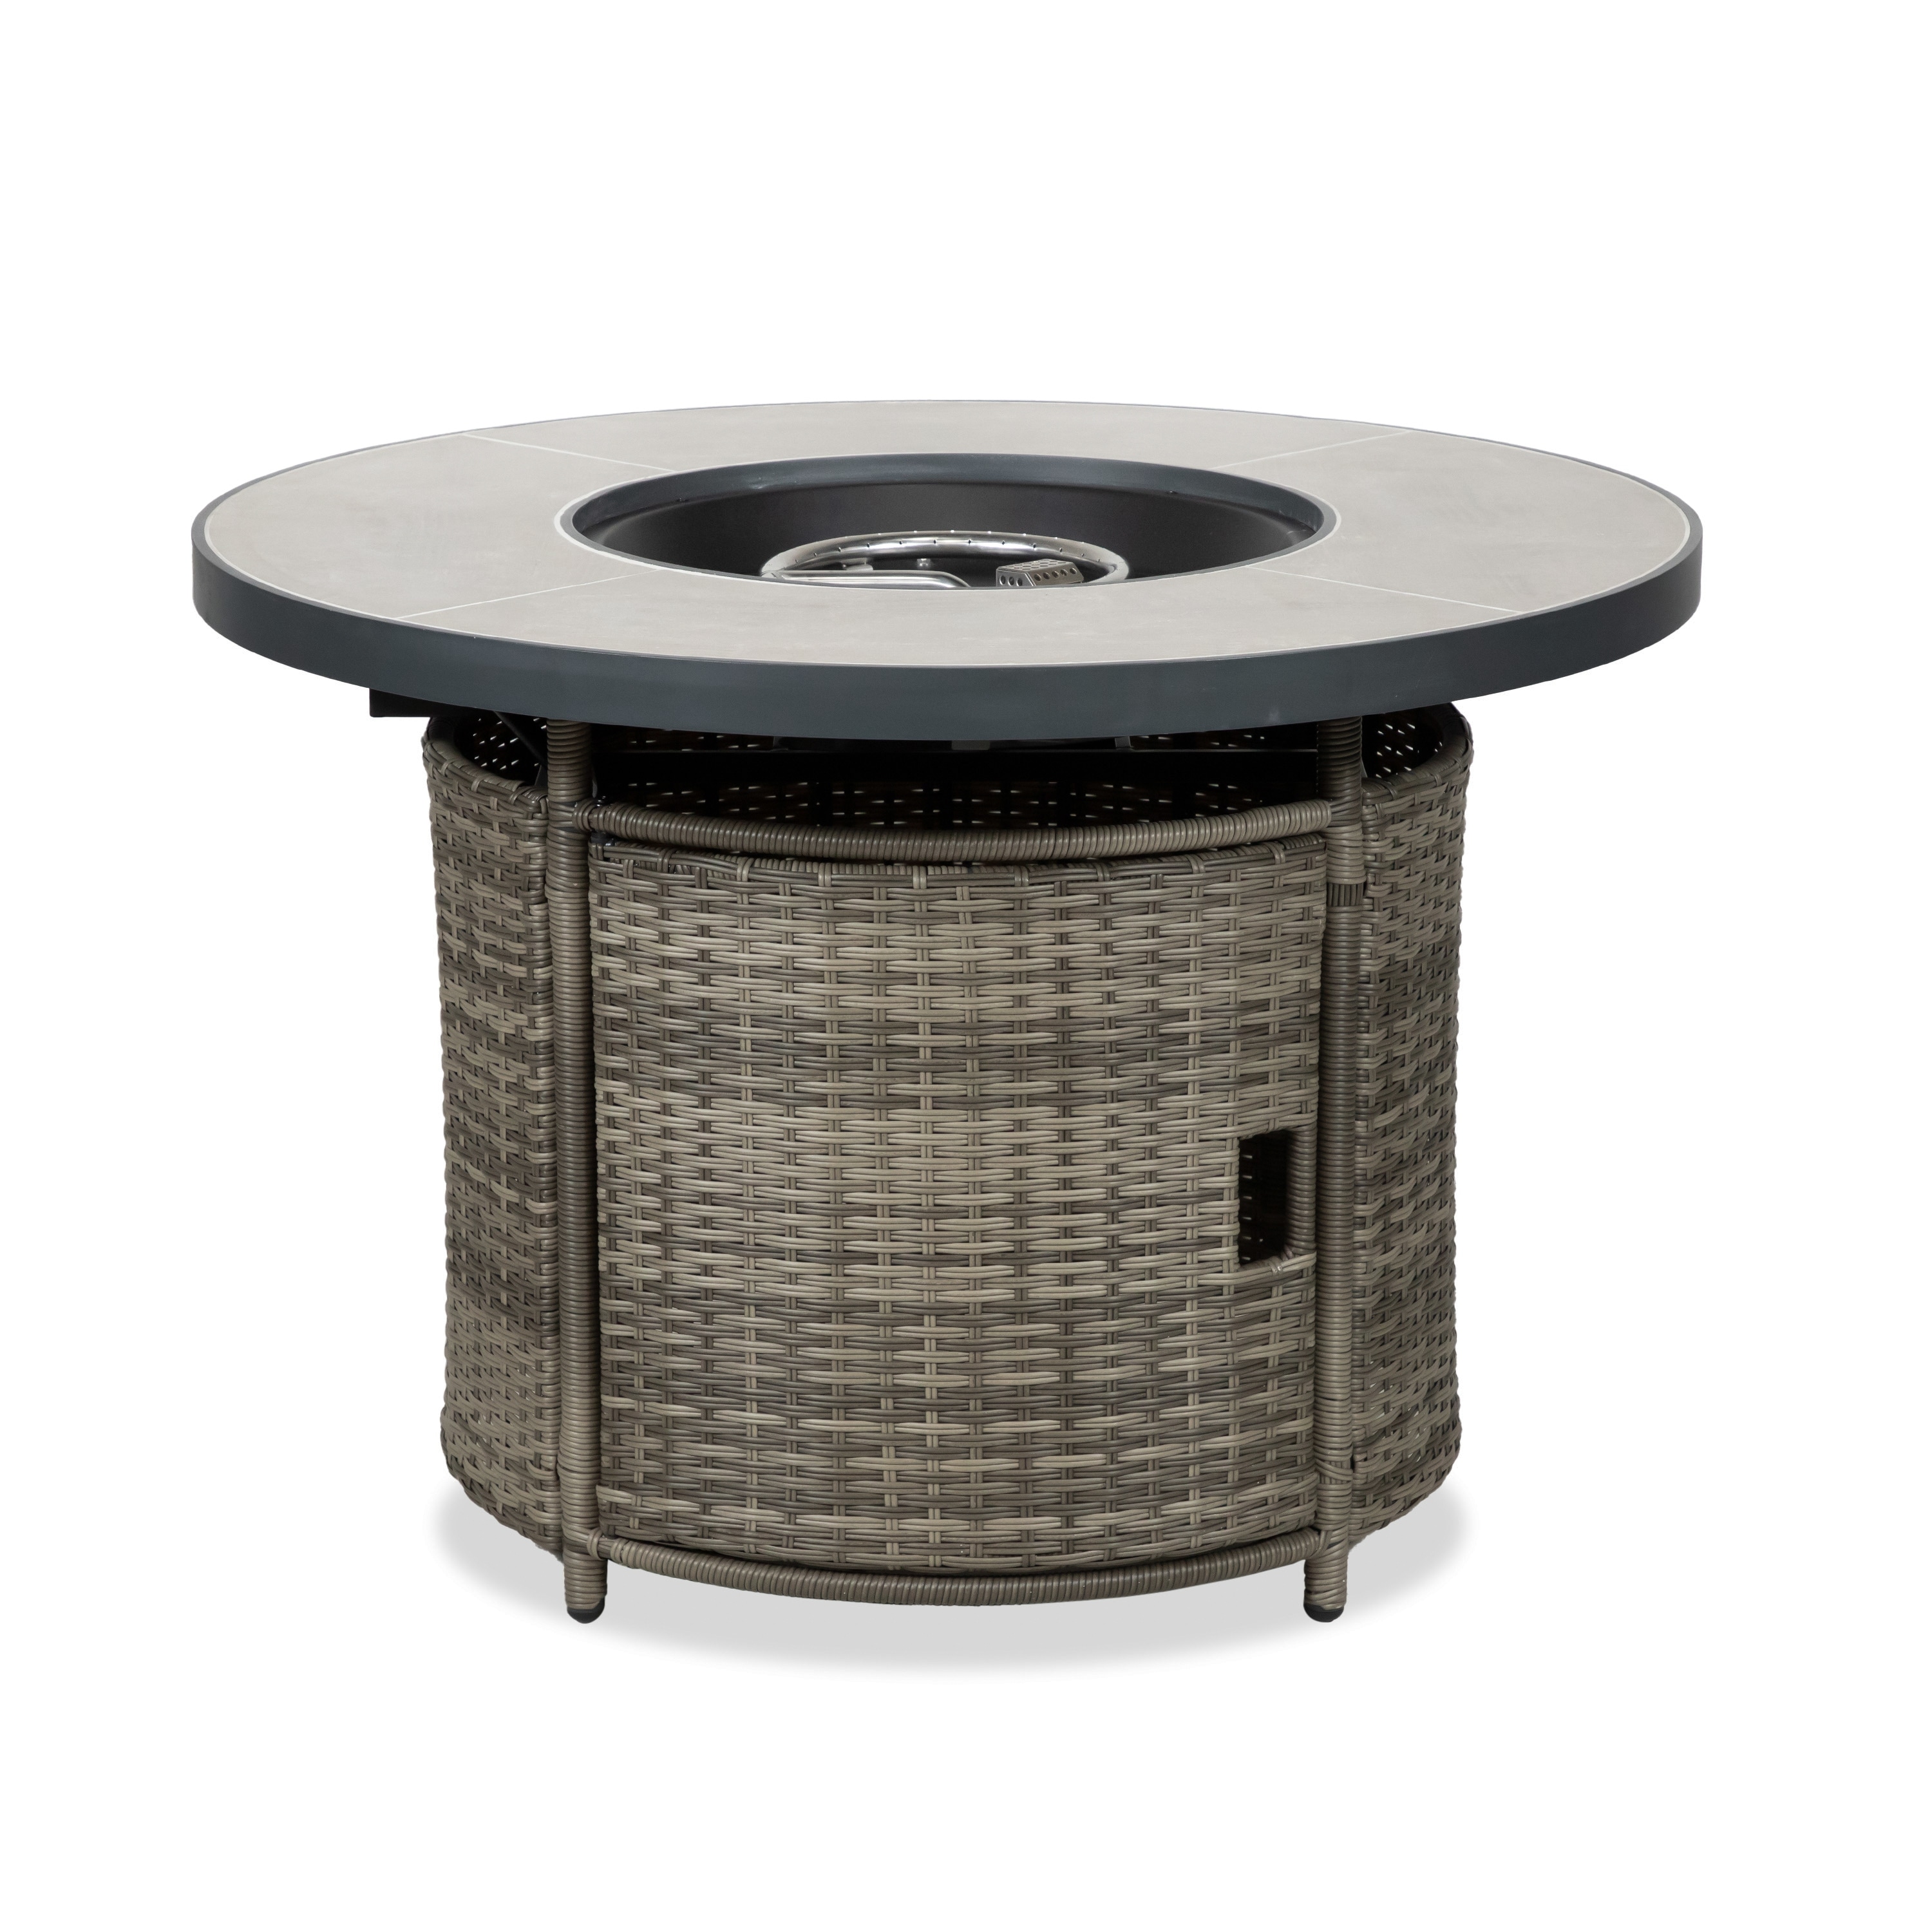 Greemotion Derek 39 inch Round Outdoor Patio Wicker Firepit Table with Tile-top - N/A